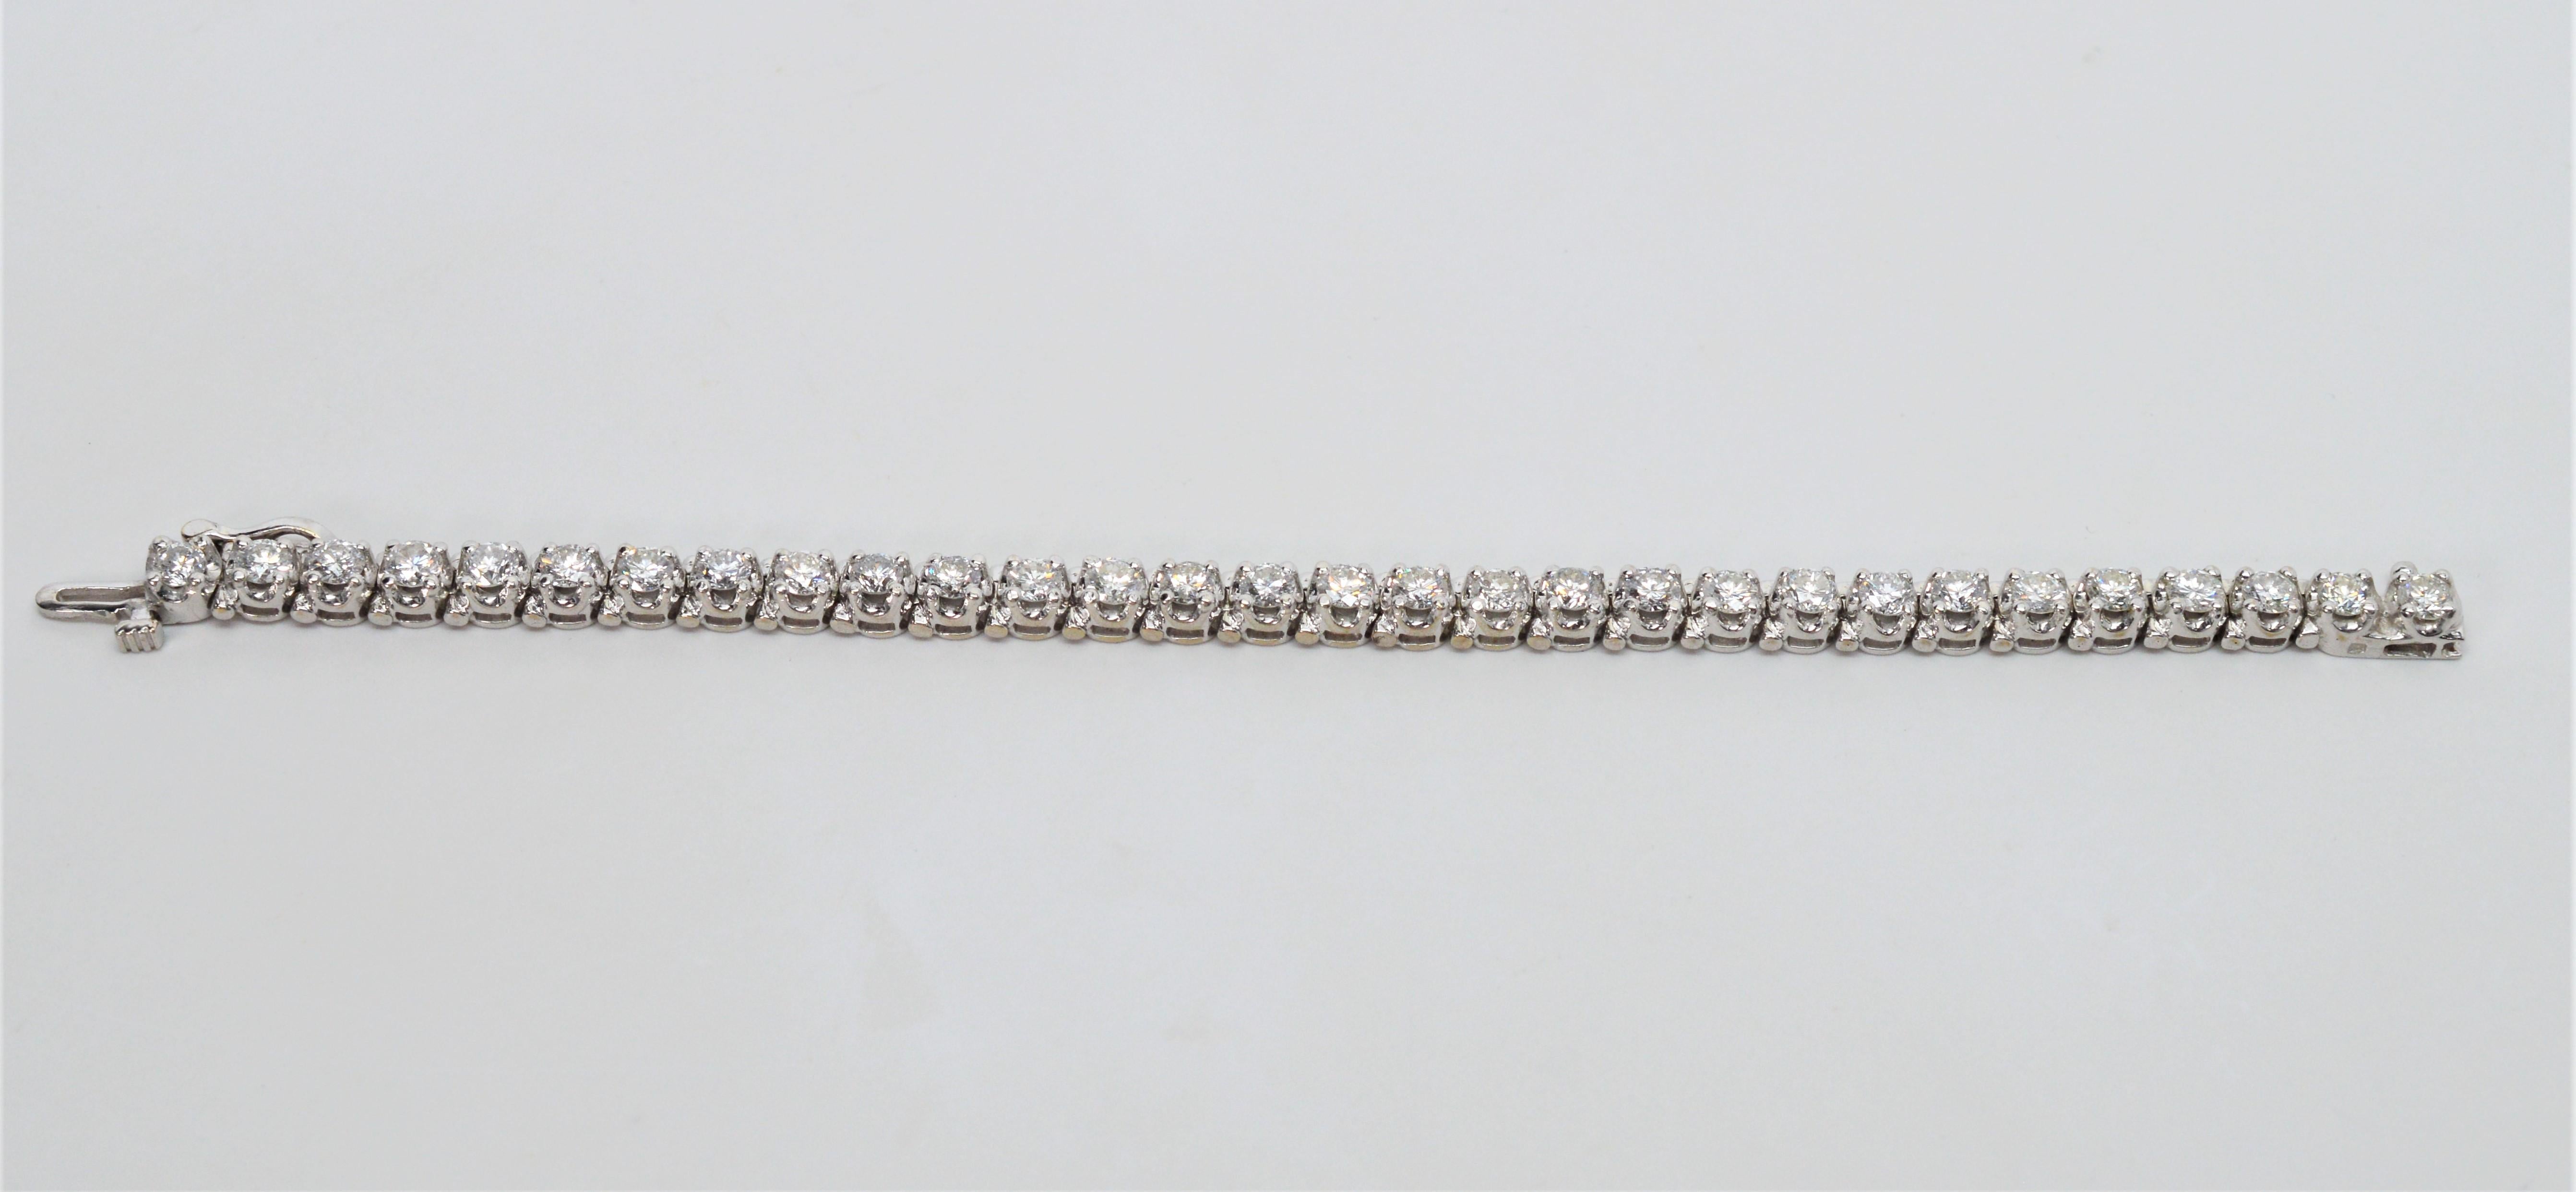 Six inches of diamonds sparkle on this elegant,  custom-made tennis bracelet. Thirty .25 carat H/SI diamonds are prong set in platinum for a total weight of 7.5 carats that are sure to get noticed. Six inches in length and outfitted with a lock and